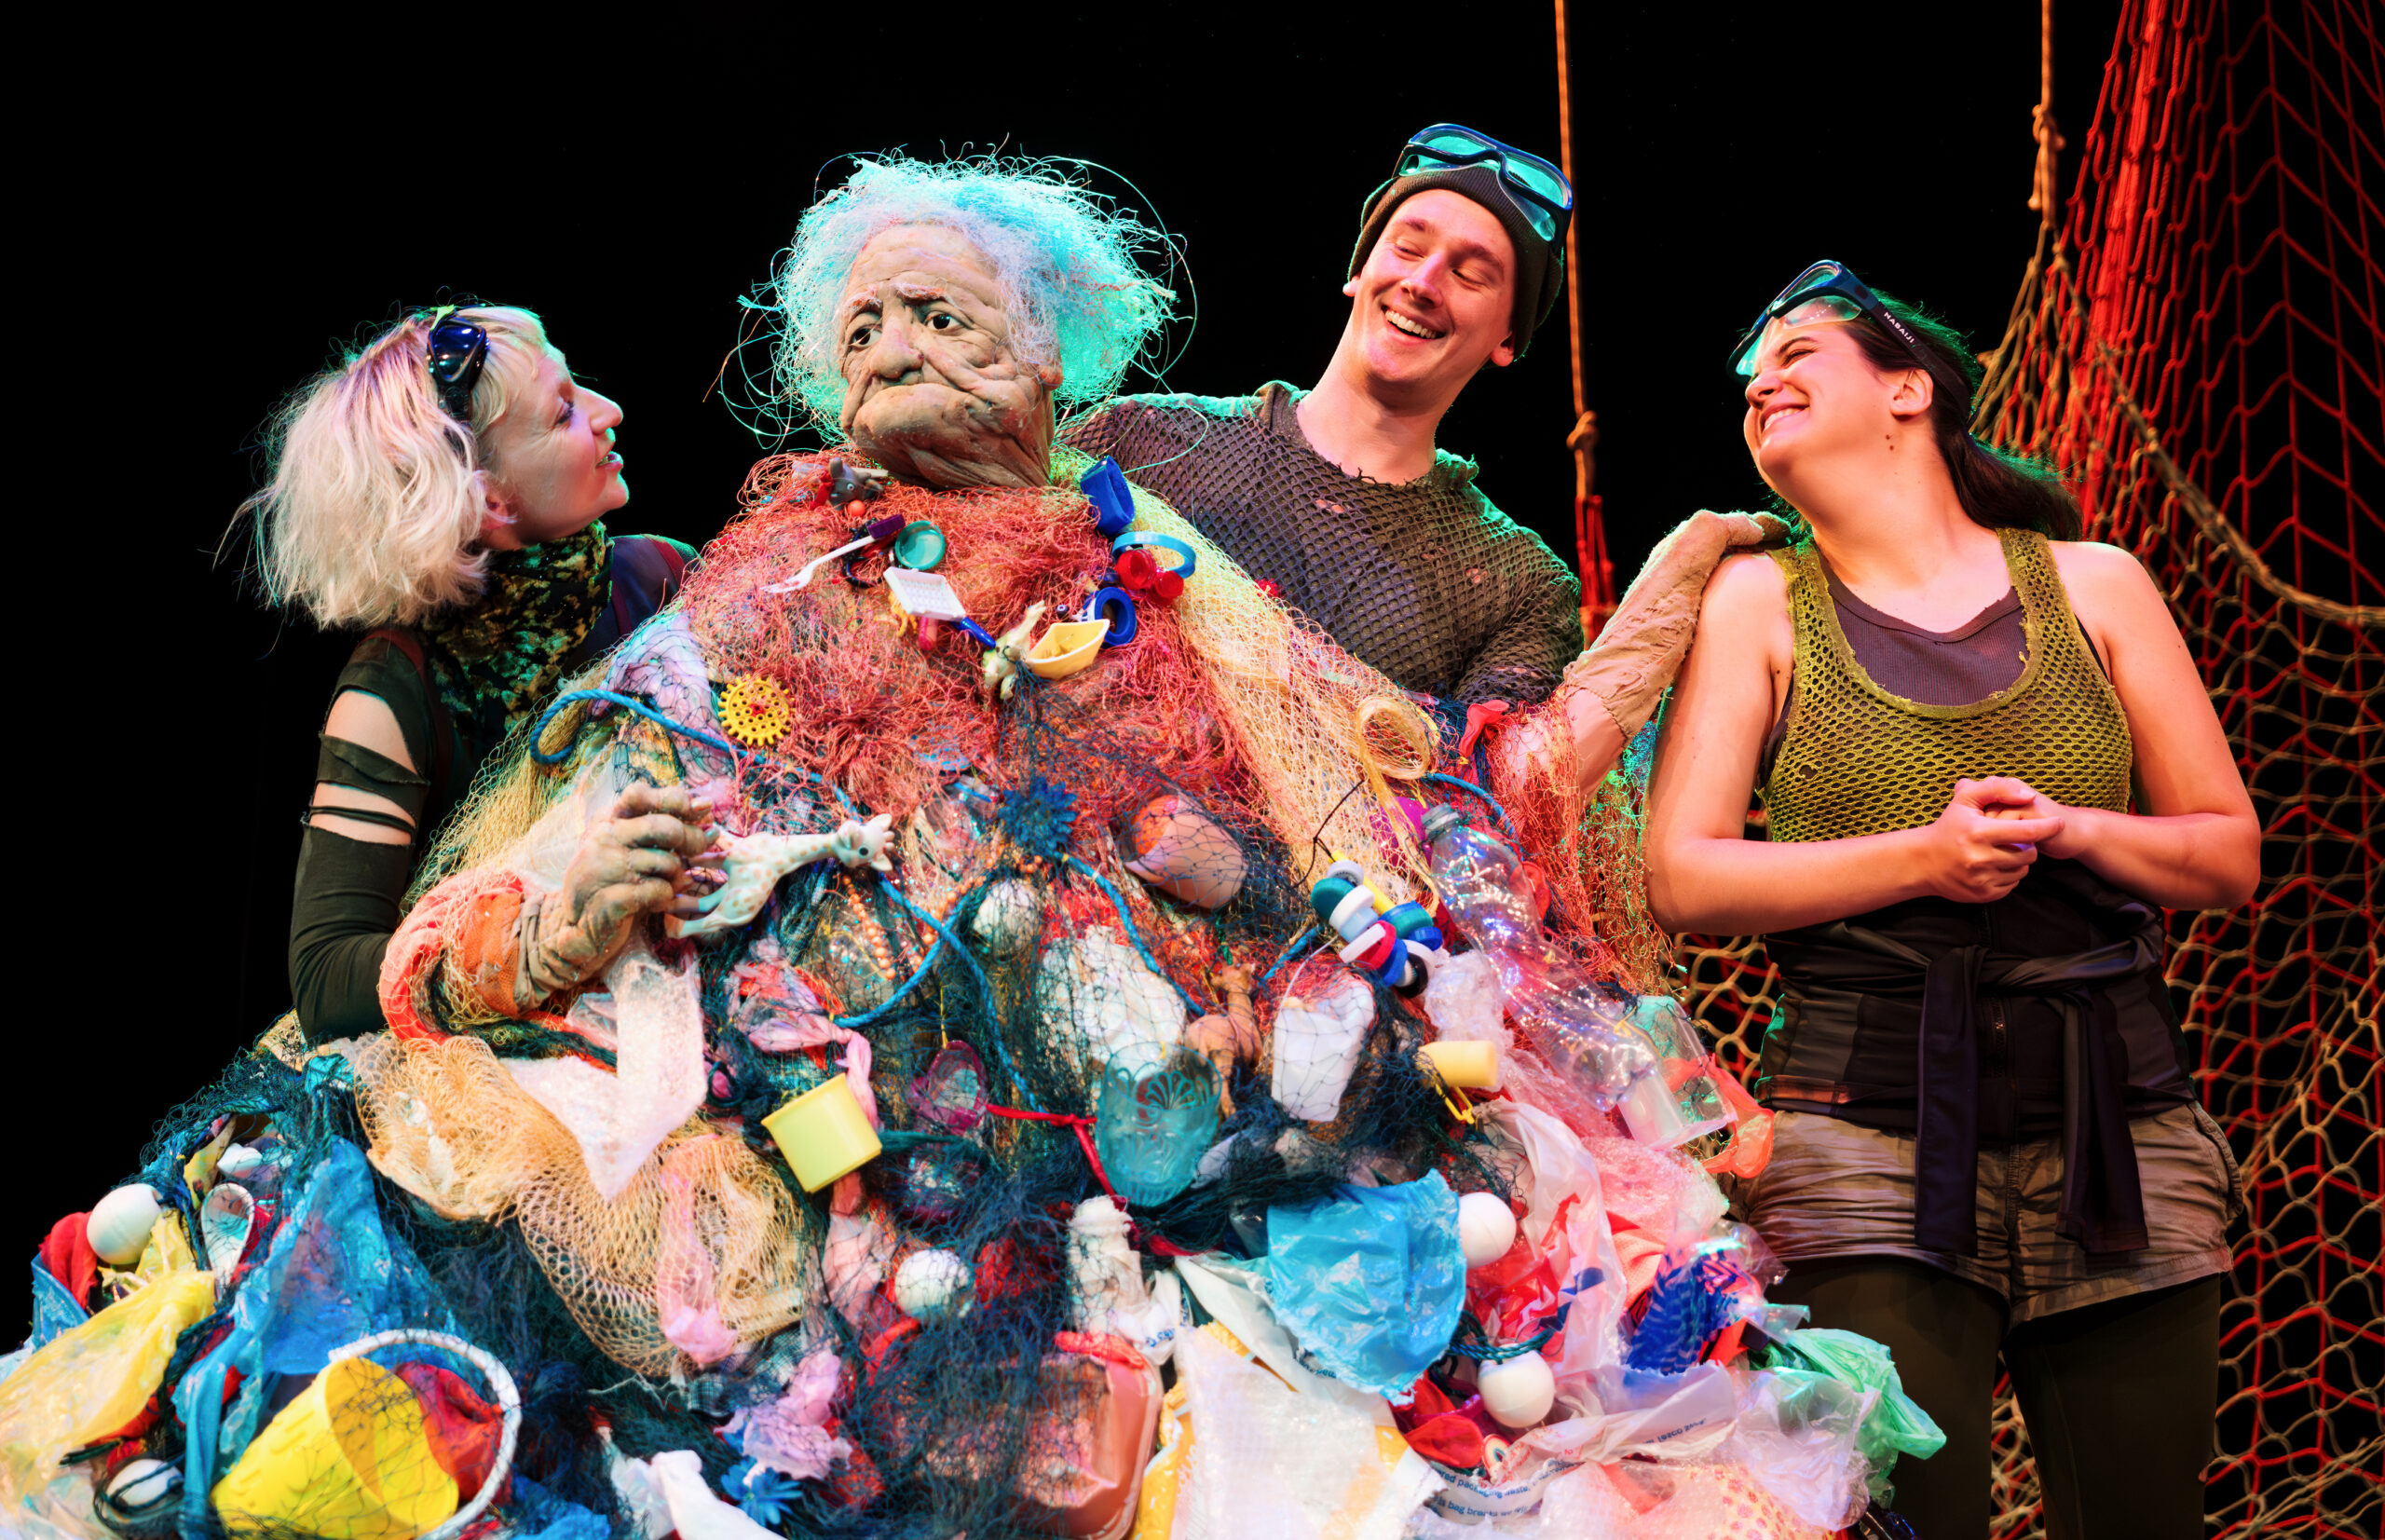 three performers laugh merrily with an ancient female puppet whose body is made out of plastic waste.